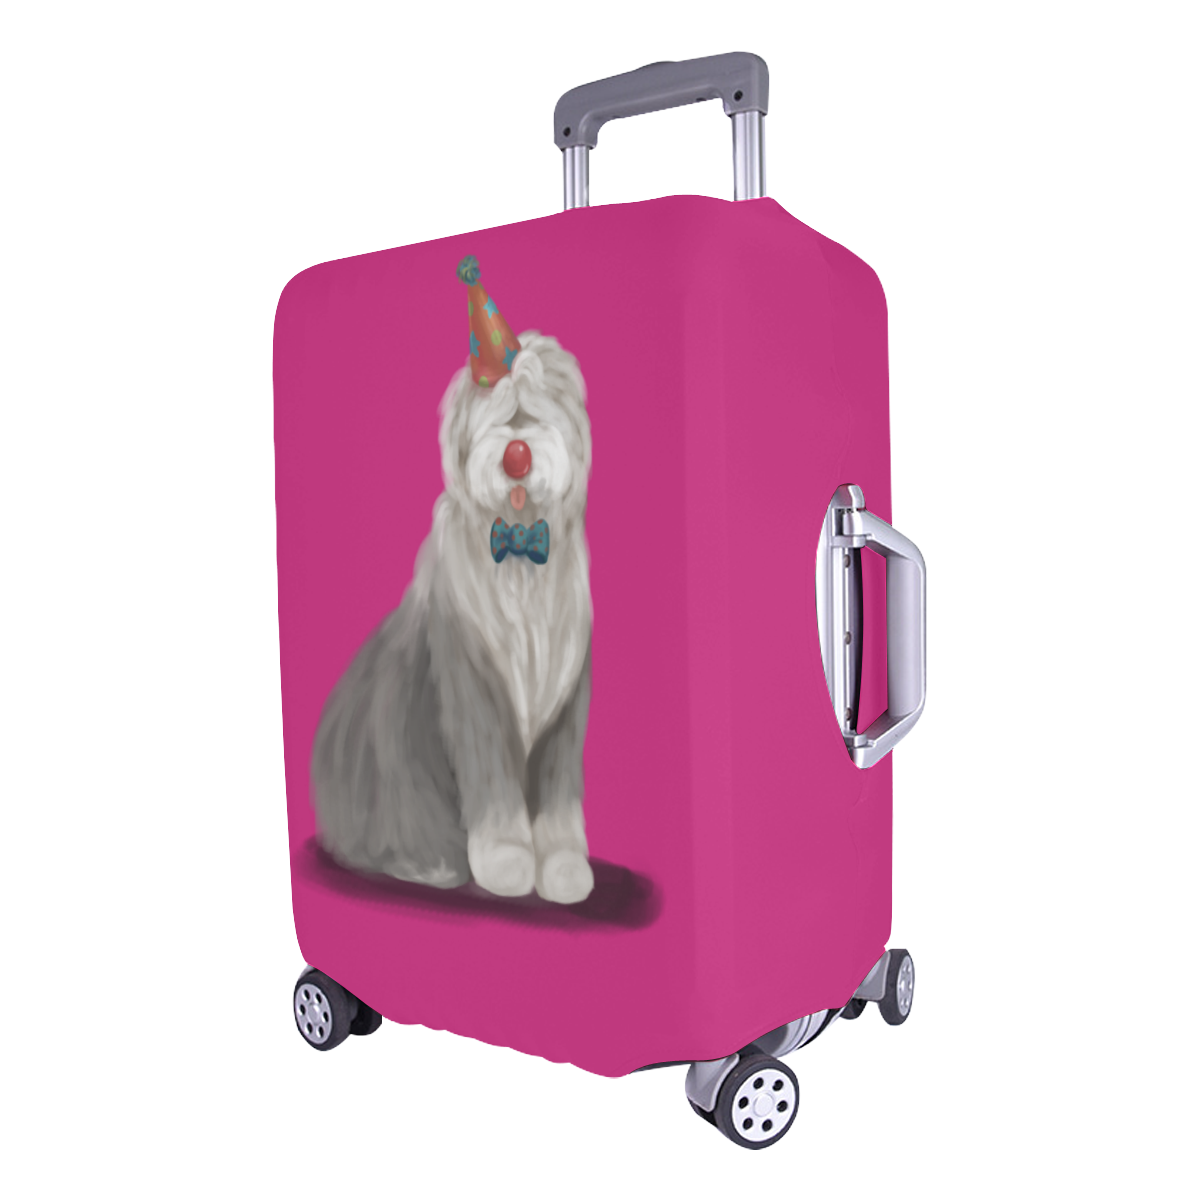 circus ball_transparent_v3 Luggage Cover/Large 26"-28"